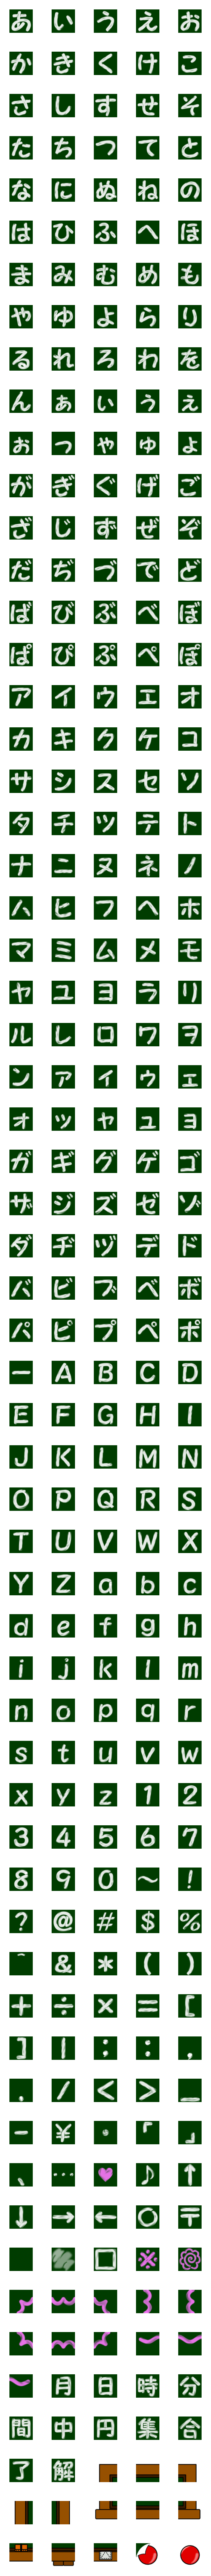 [LINE絵文字]黒板セット(デコ文字＋絵文字)の画像一覧